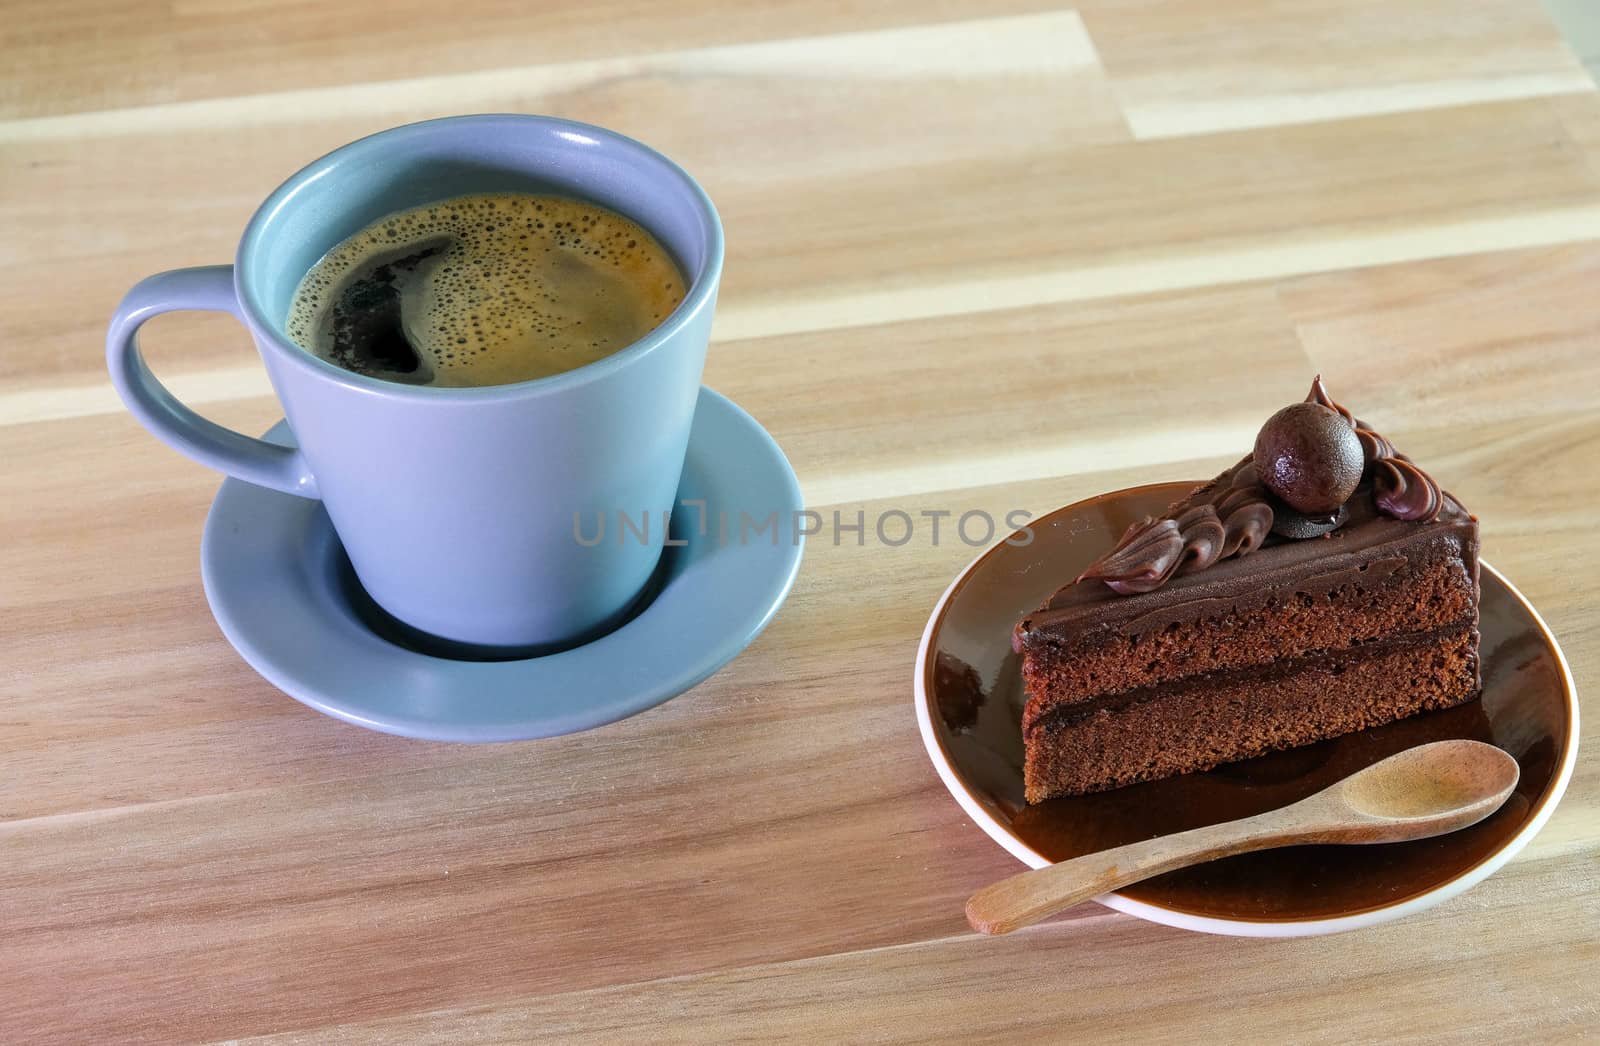 Chocolate cake and a cup of coffee on wooden table